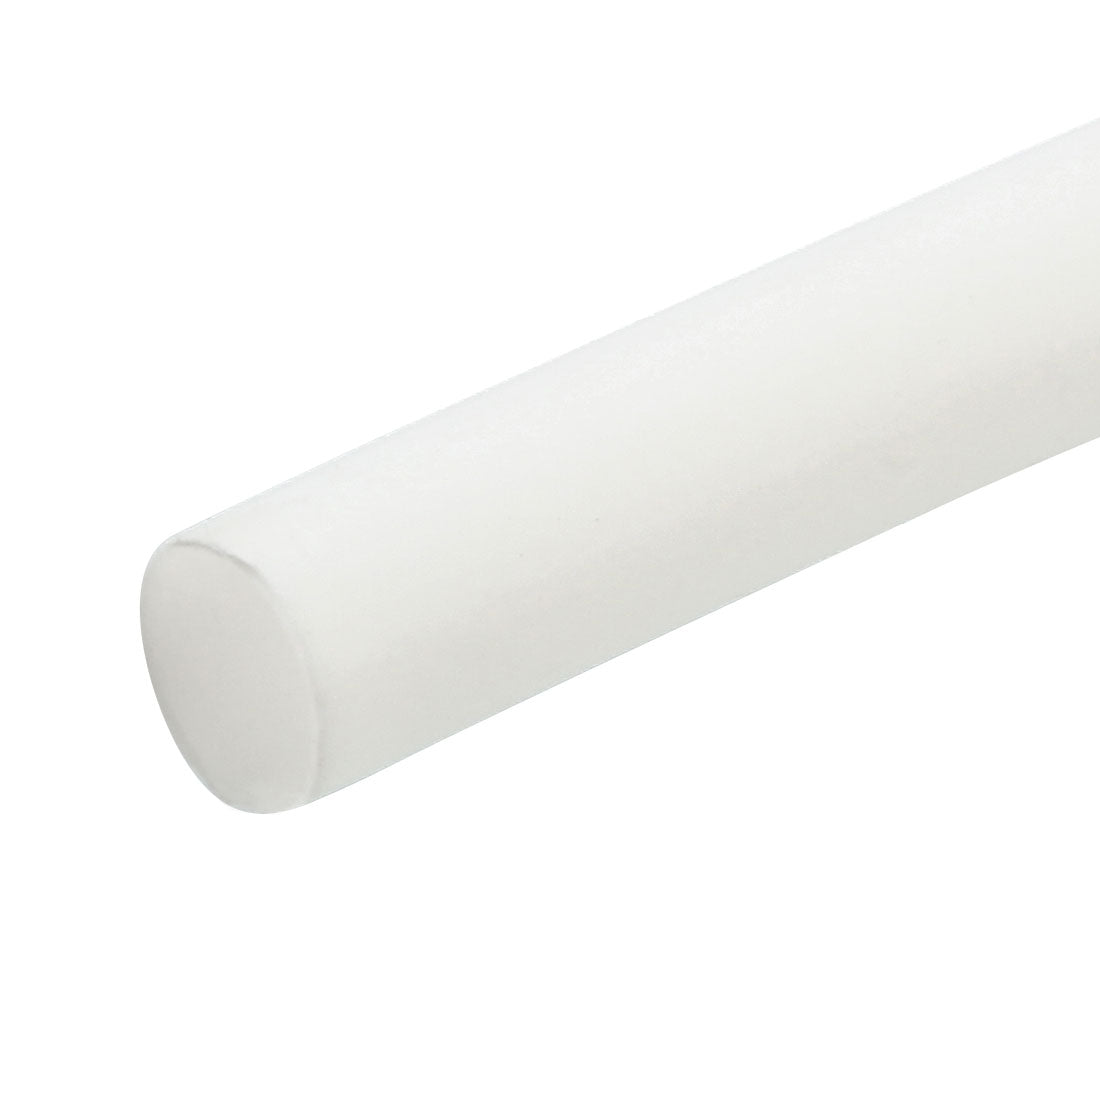 uxcell Uxcell Heat Shrink Tube 2:1 Electrical Insulation Tube Wire Cable Tubing Sleeving Wrap White 2mm Diameter 1m Long